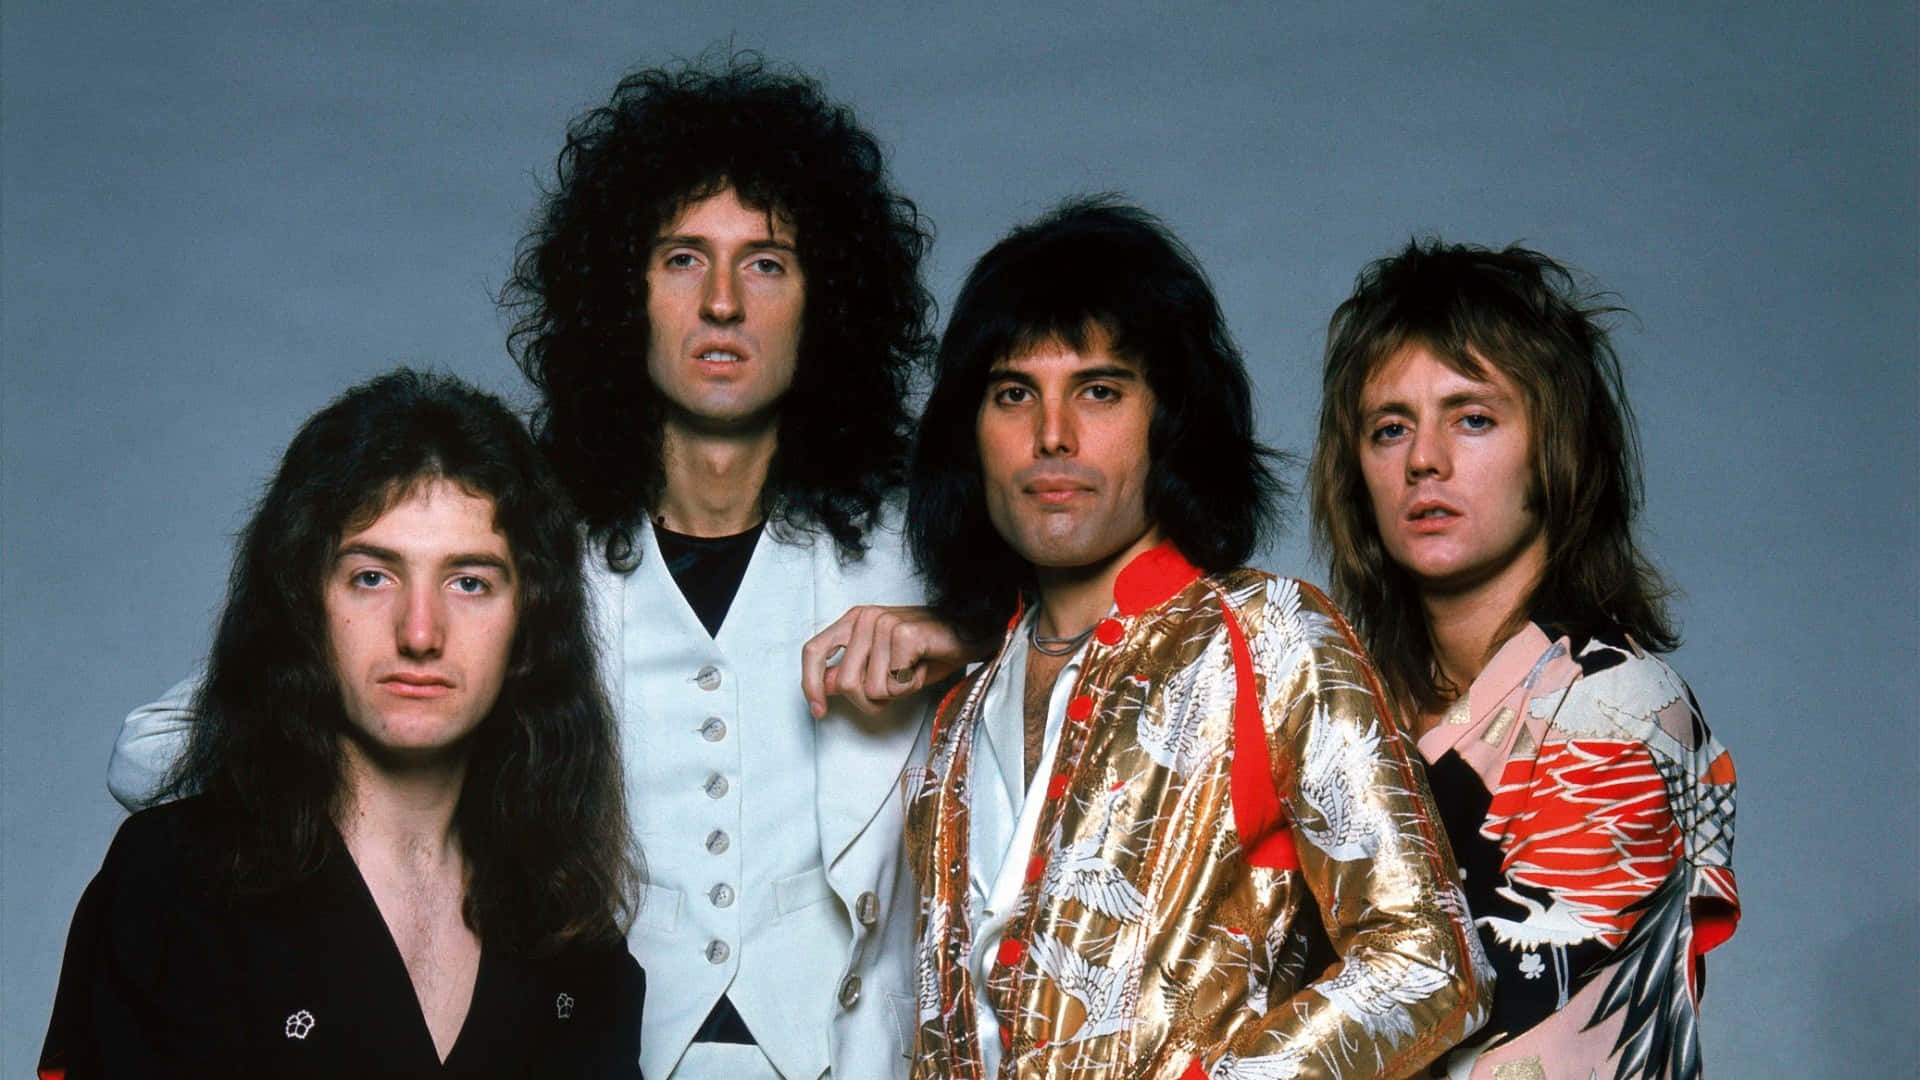 Legendary British rock band Queen have been rocking the world since their formation in the early 70s.